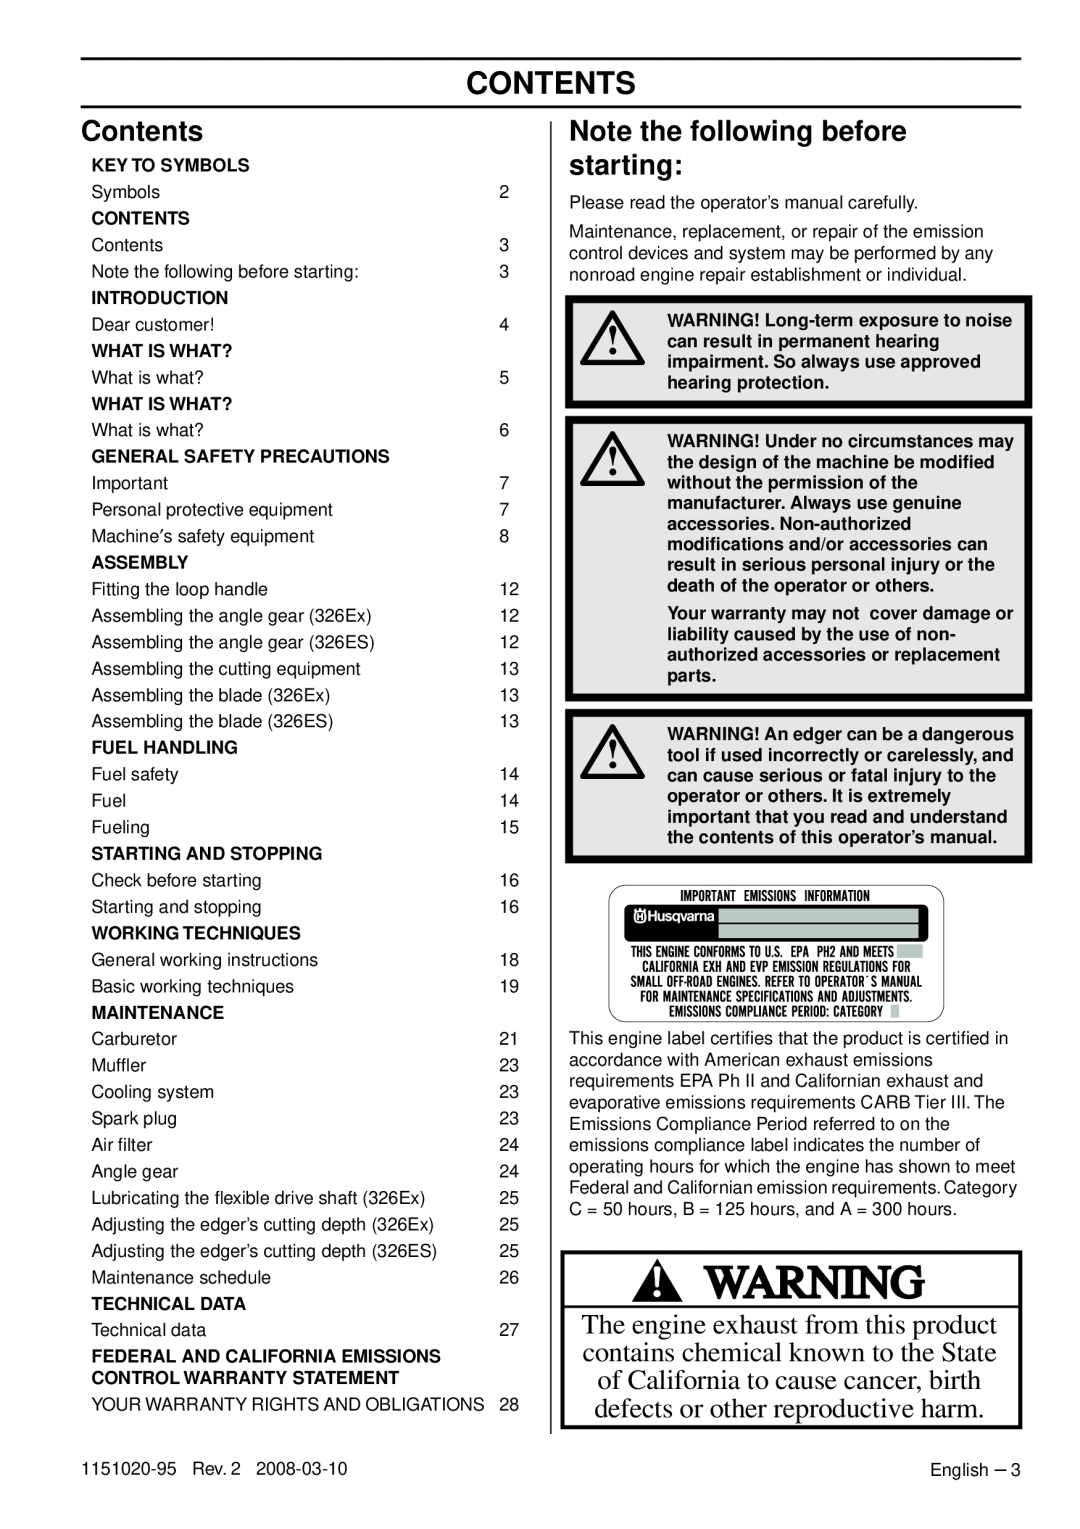 Husqvarna 326ES manual Contents, Note the following before starting, Key To Symbols, Introduction, What Is What?, Assembly 